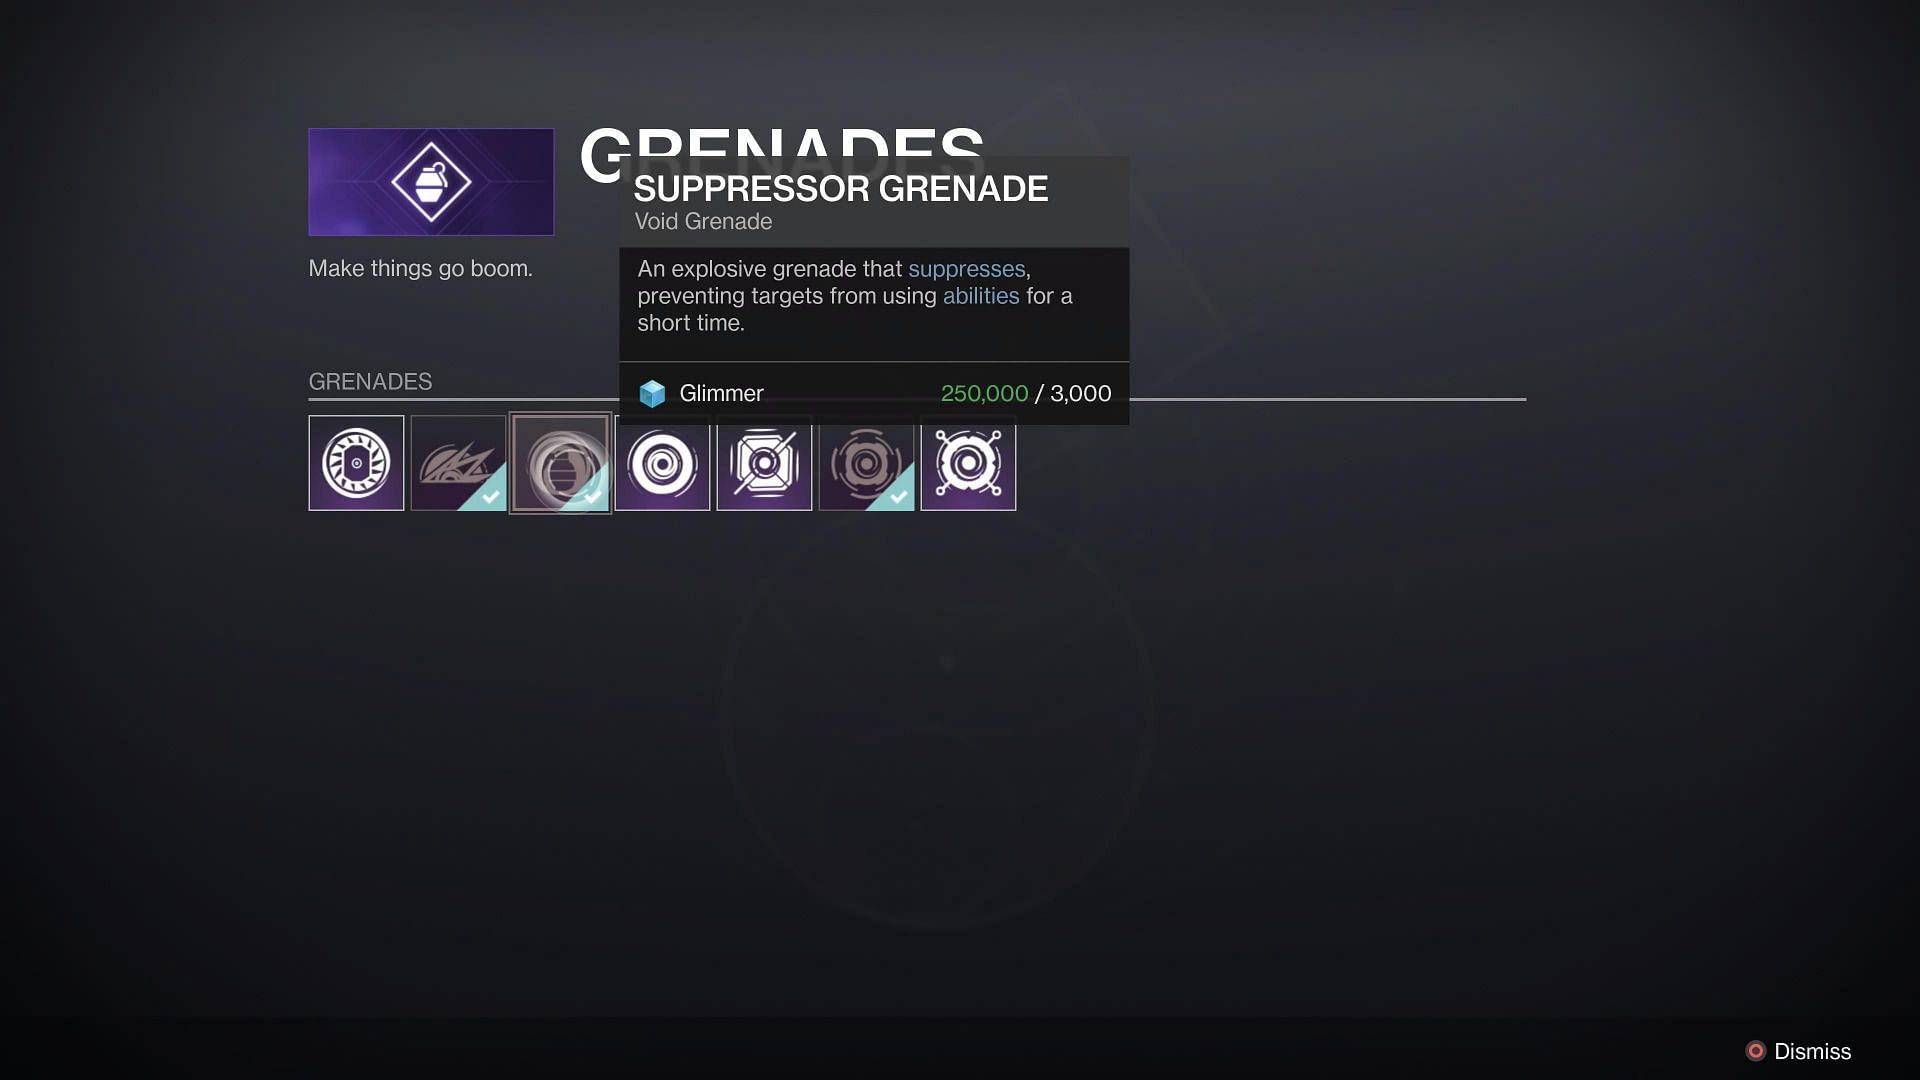 The Suppressor Grenade is very helpful in preventing enemies from using abilities (Image via Destiny 2 The Witch Queen)